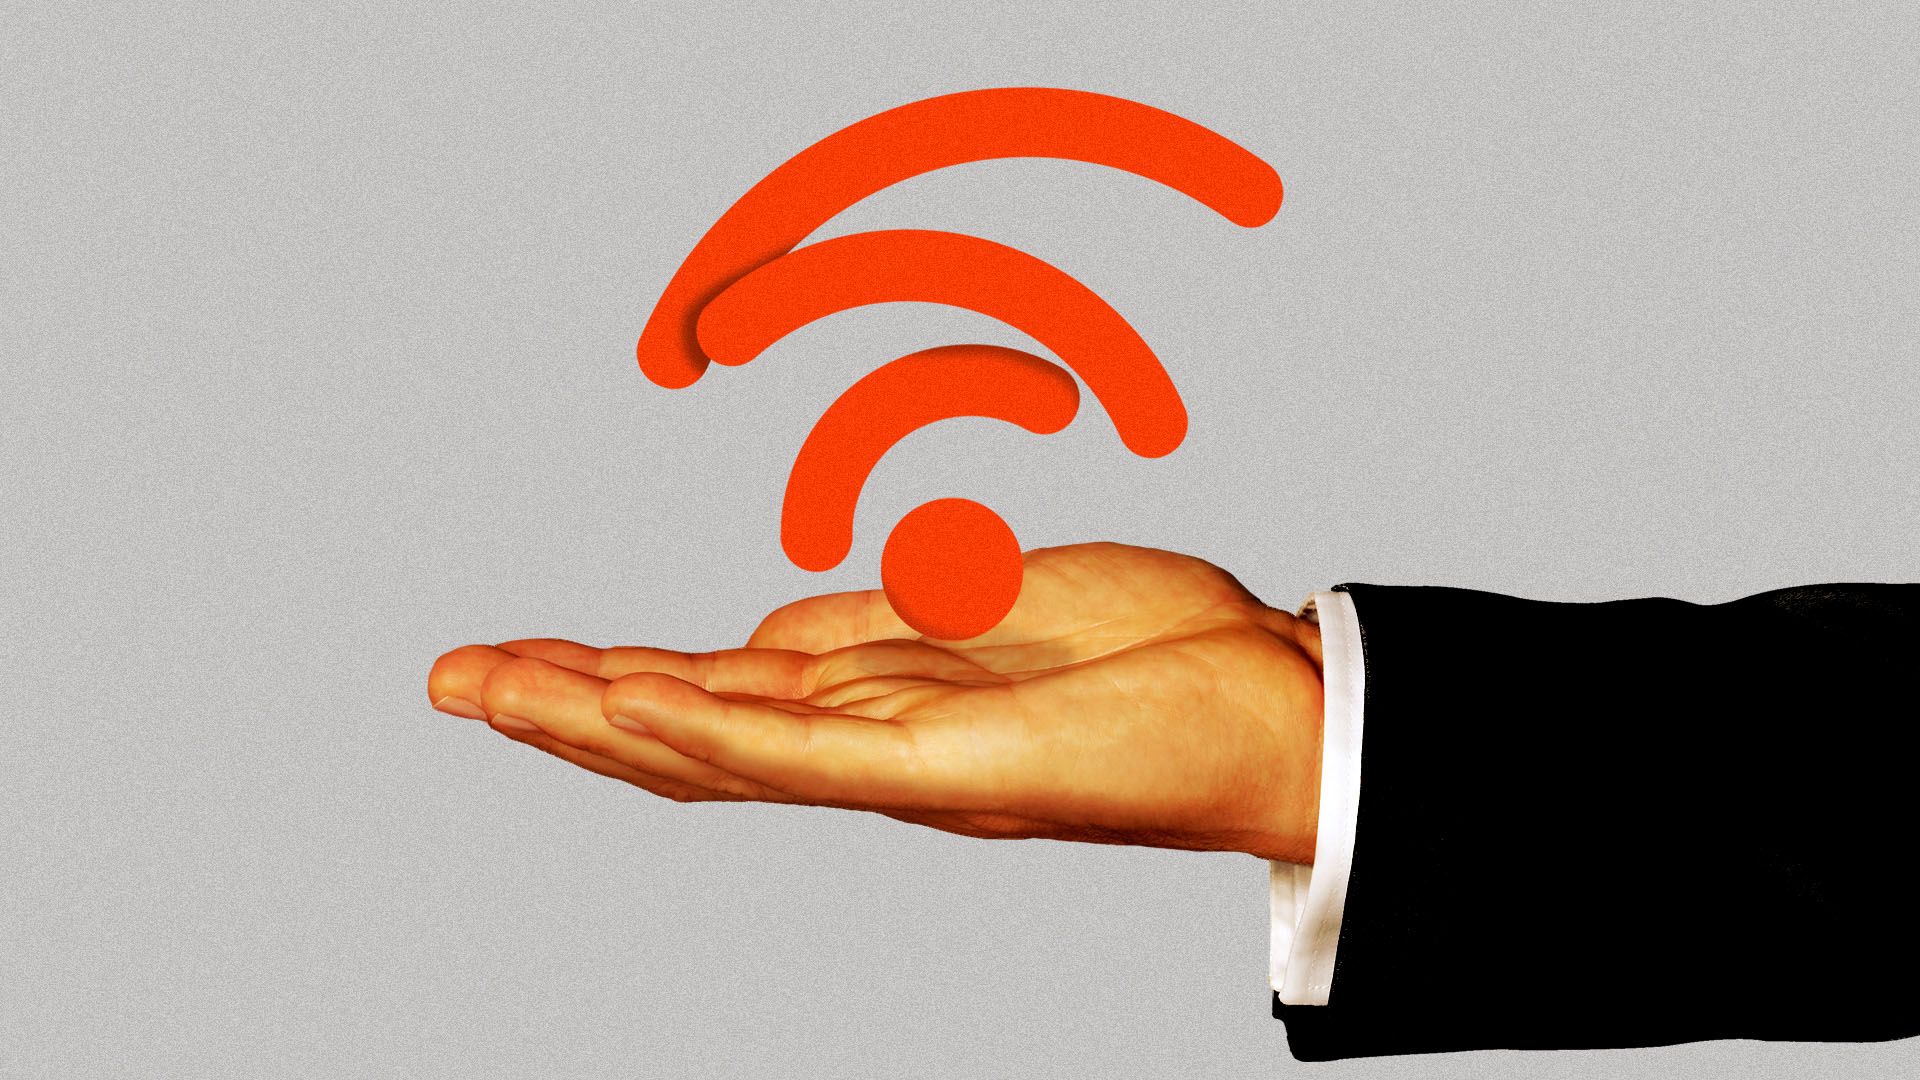 Illustration of a hand holding a jumbled wifi connectivity icon